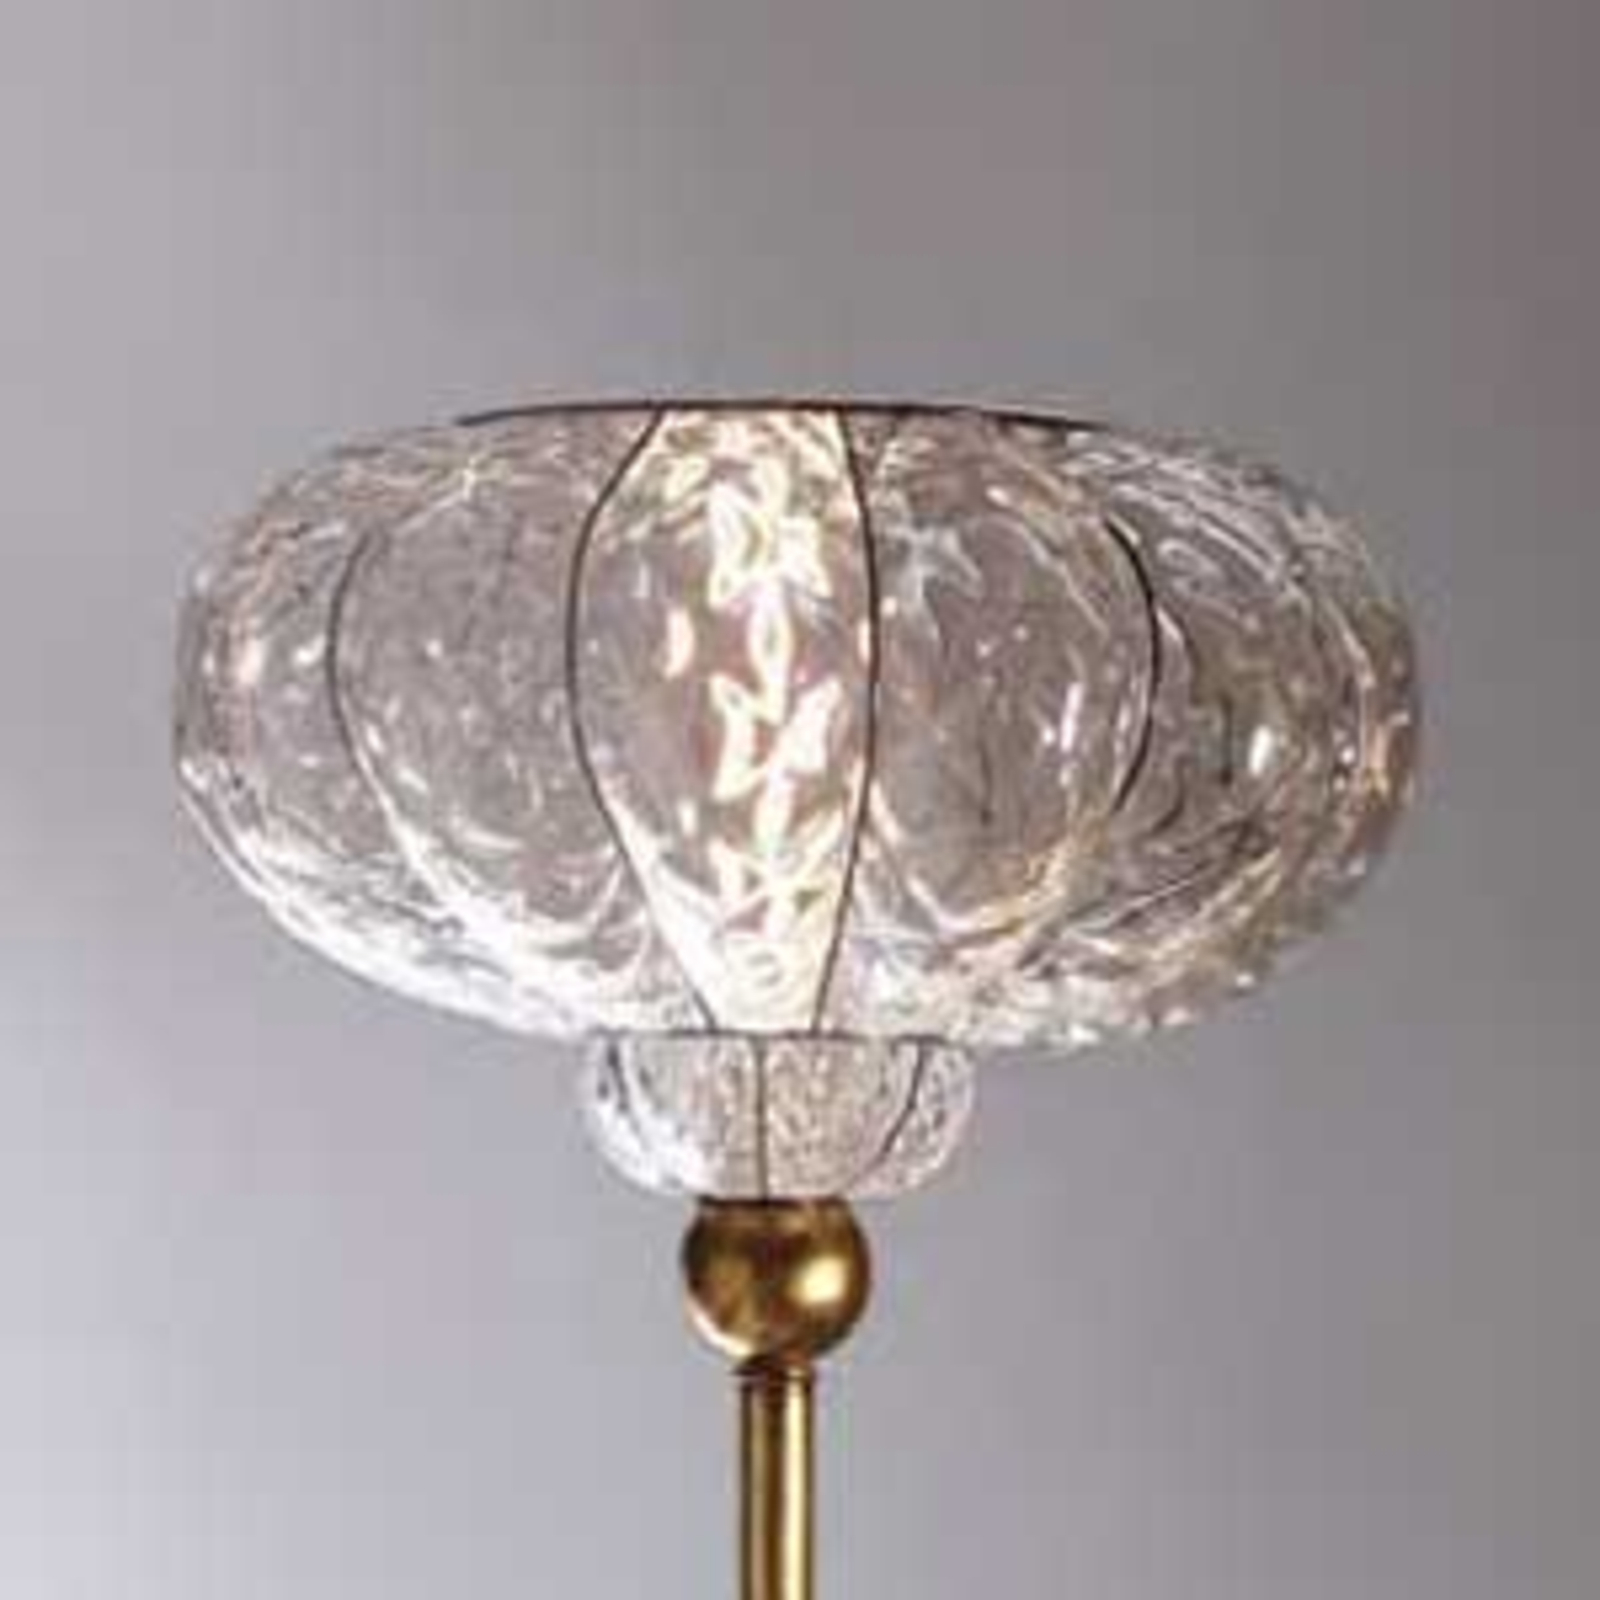 Floor lamp SULTANO with hand-blown glass